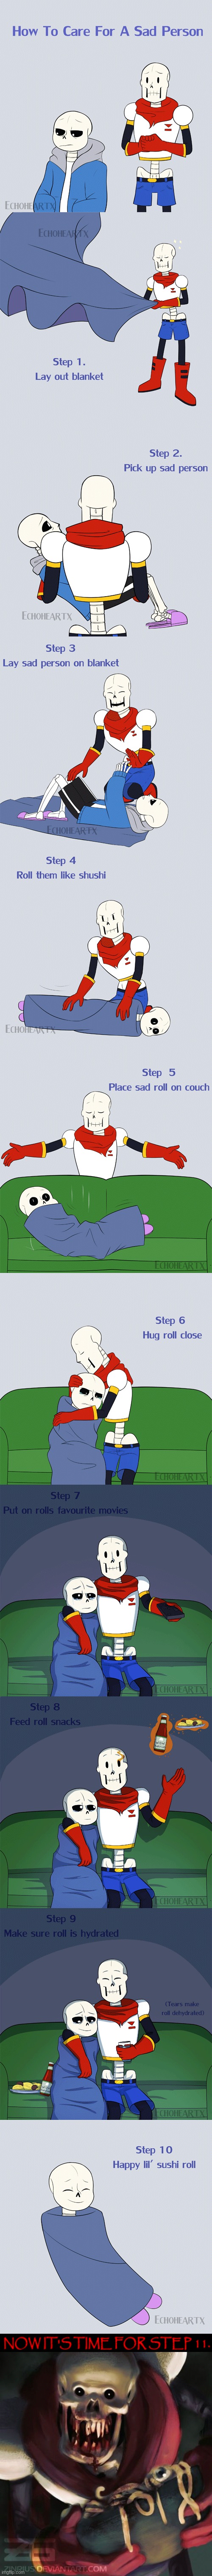 Papyrus's guide to make a sad person happy. | image tagged in funny memes,funny,cursed,undertale,memes | made w/ Imgflip meme maker